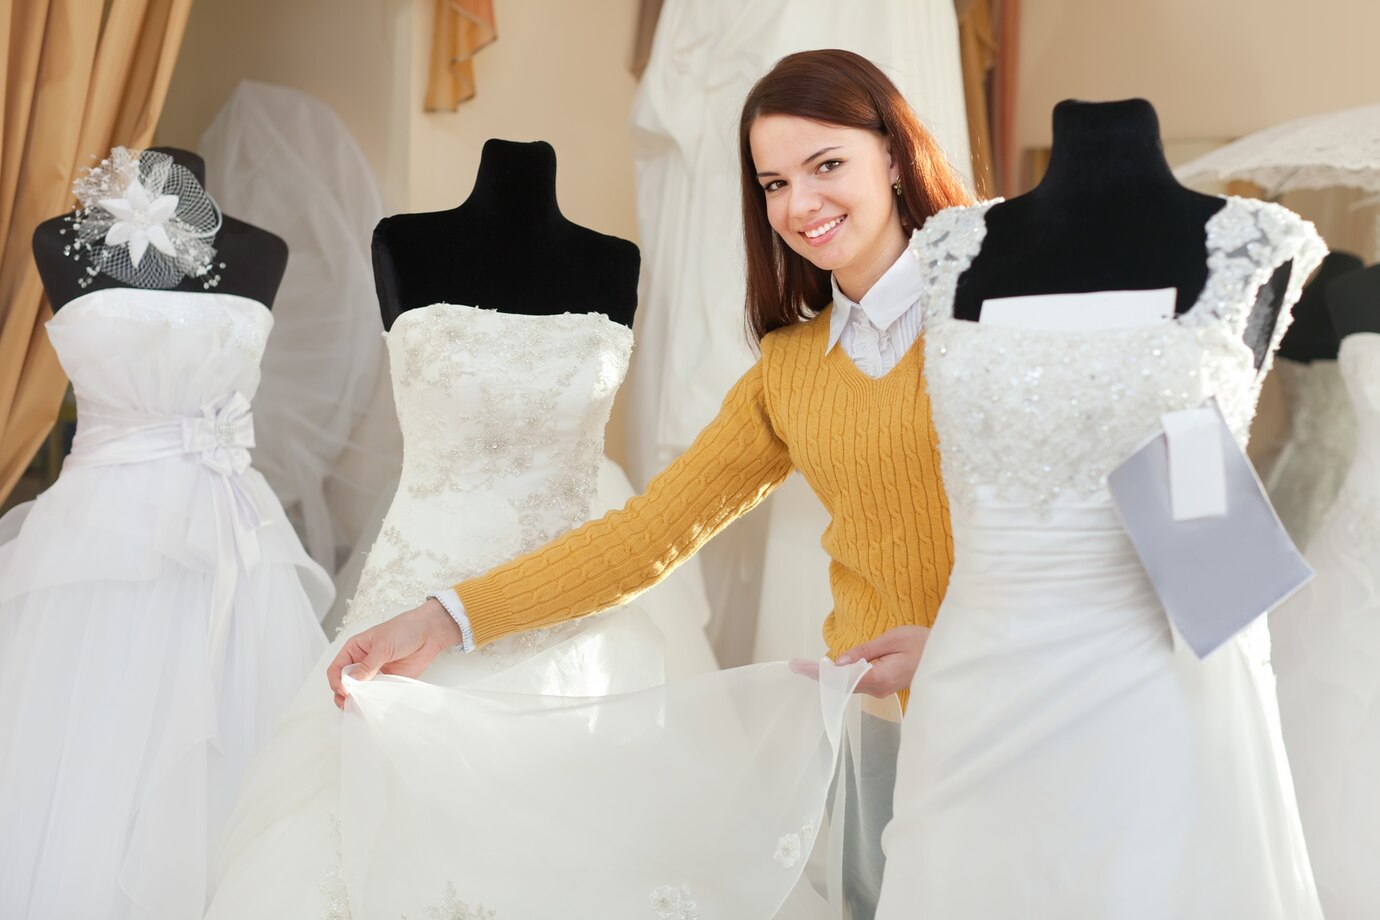 Getting Married? Here are 12 Bridal Fashion Stores in Rotterdam for Bride and Groom